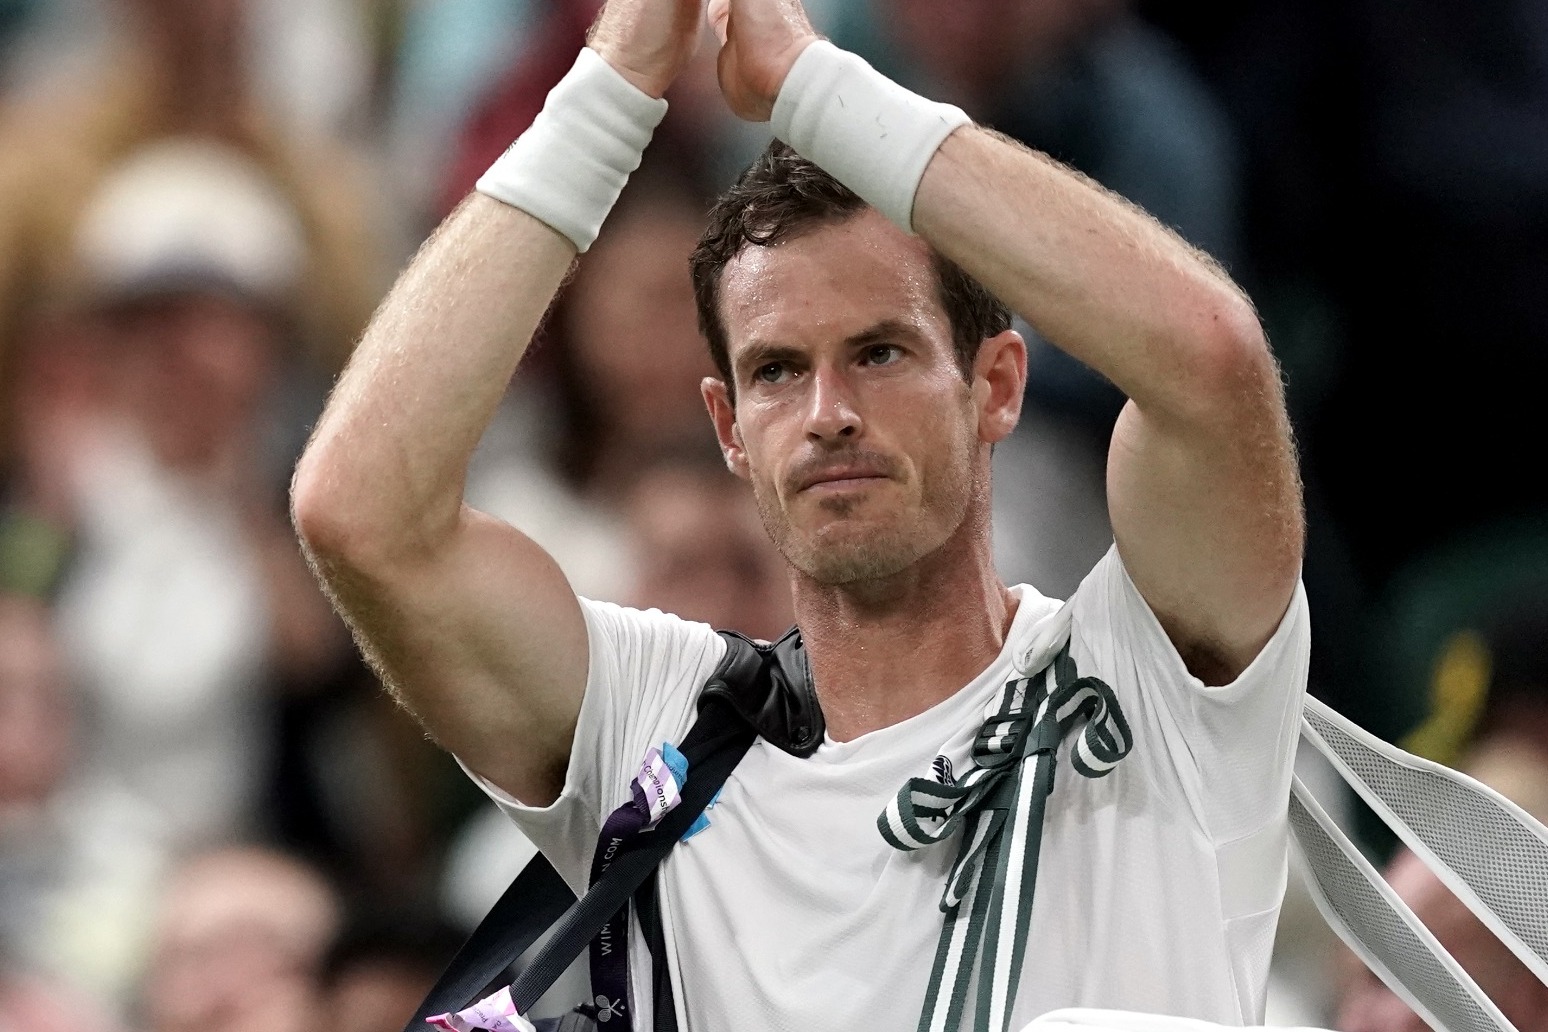 Murray leads 5th seed but must come back on second day to complete victory 